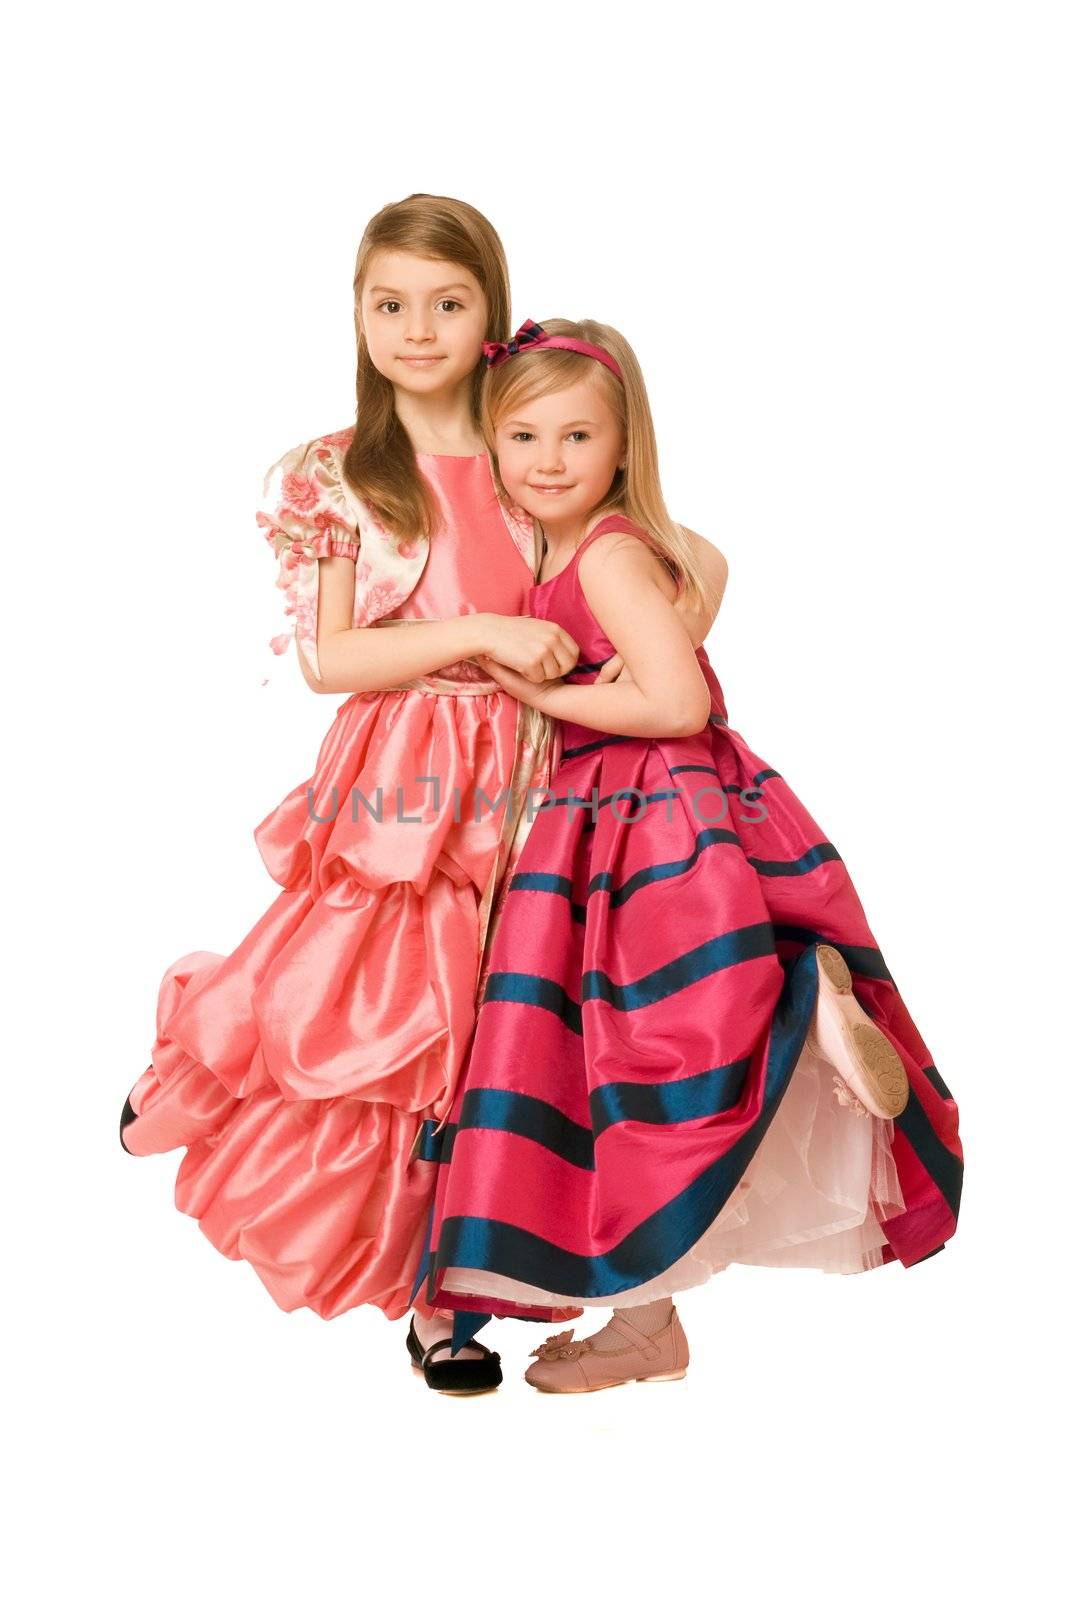 Two attractive little girls in a long dress